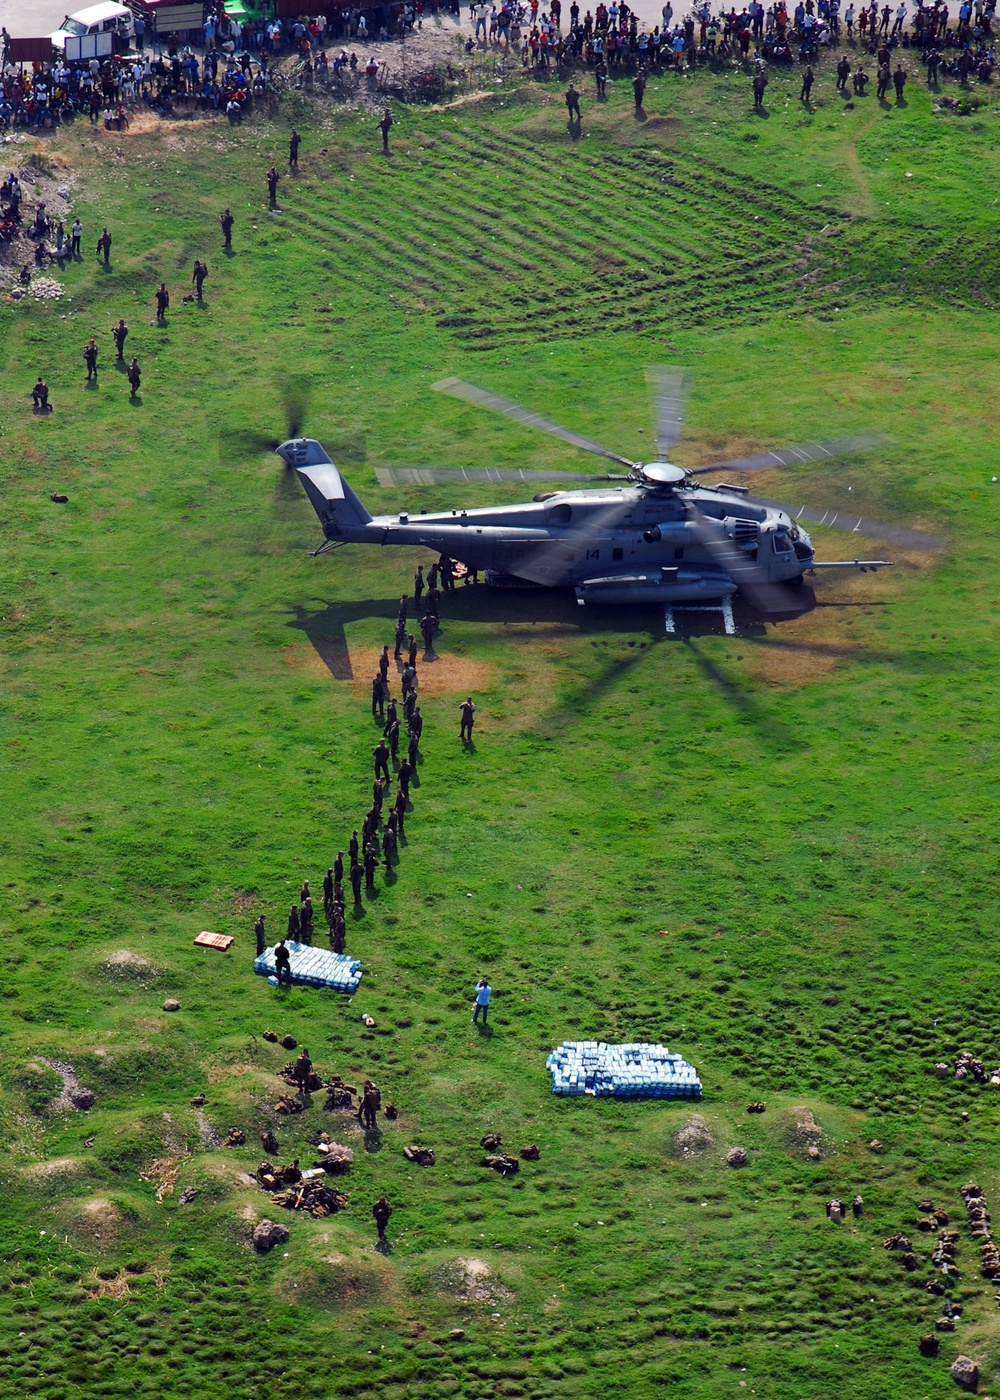 Operation Unified Response, Bataan Amphibious Relief Mission